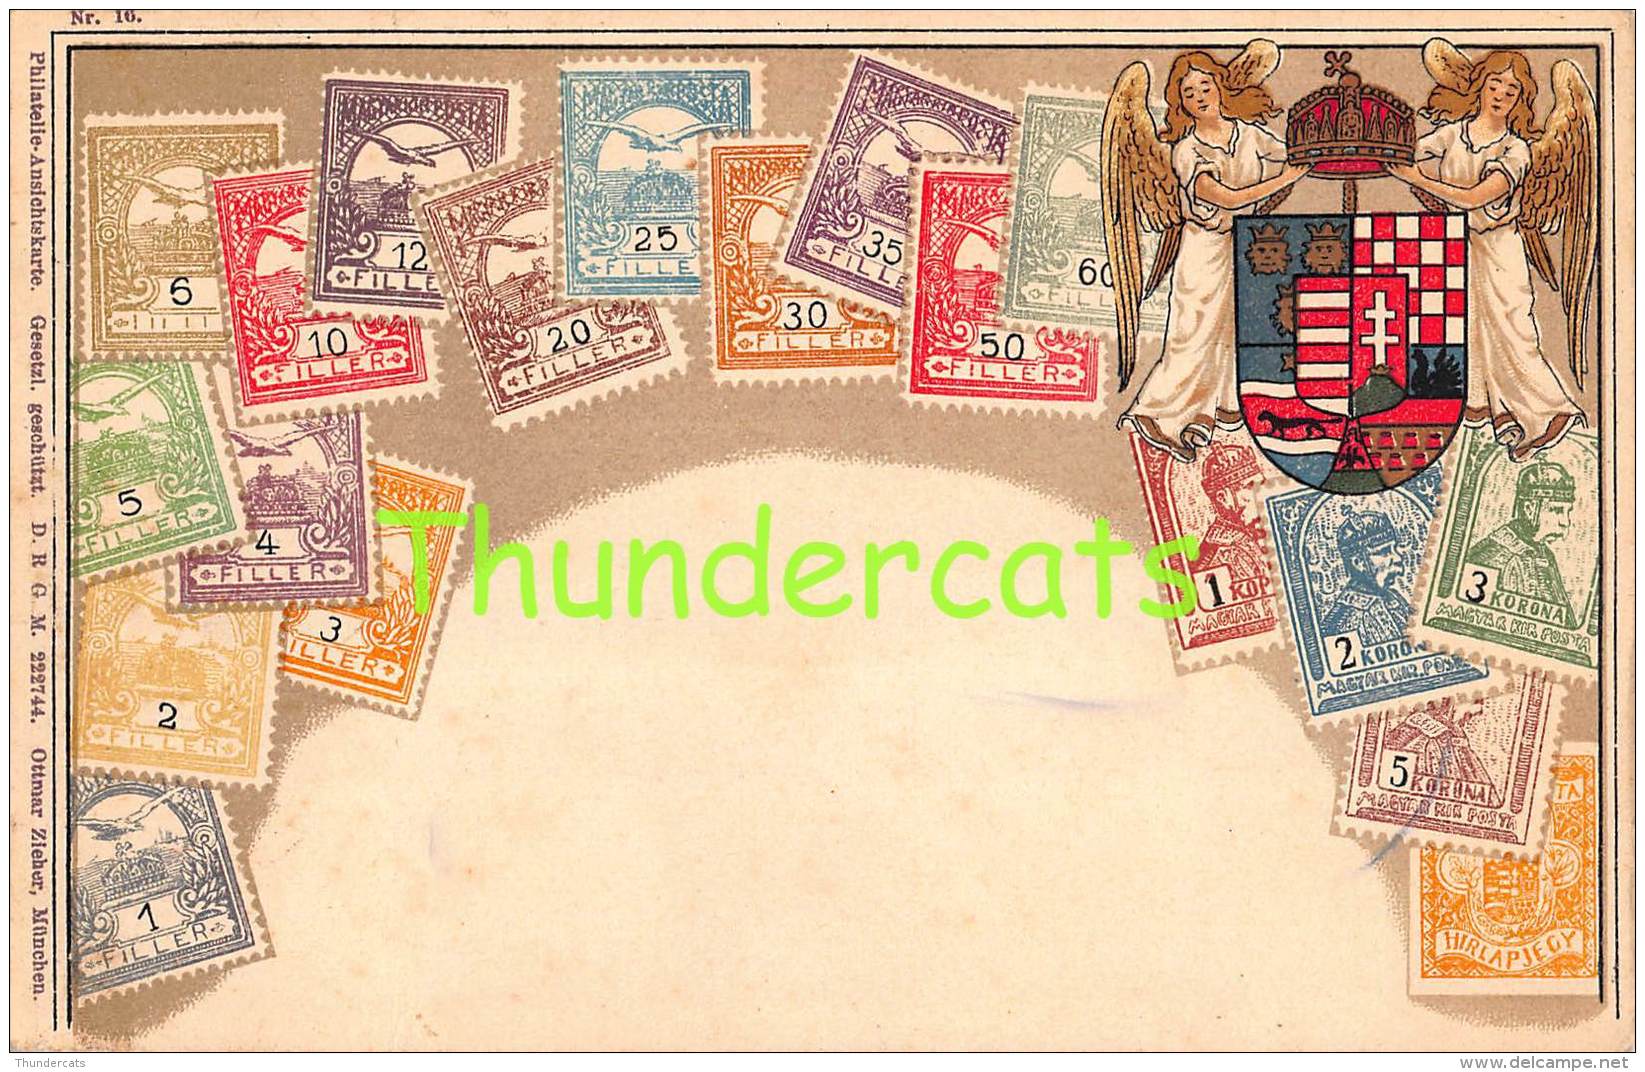 CPA  LE  LANGAGE DES TIMBRES STAMPS  OTTMAR ZIEHER HUNGARY HONGRIE HUNGARIA - Timbres (représentations)